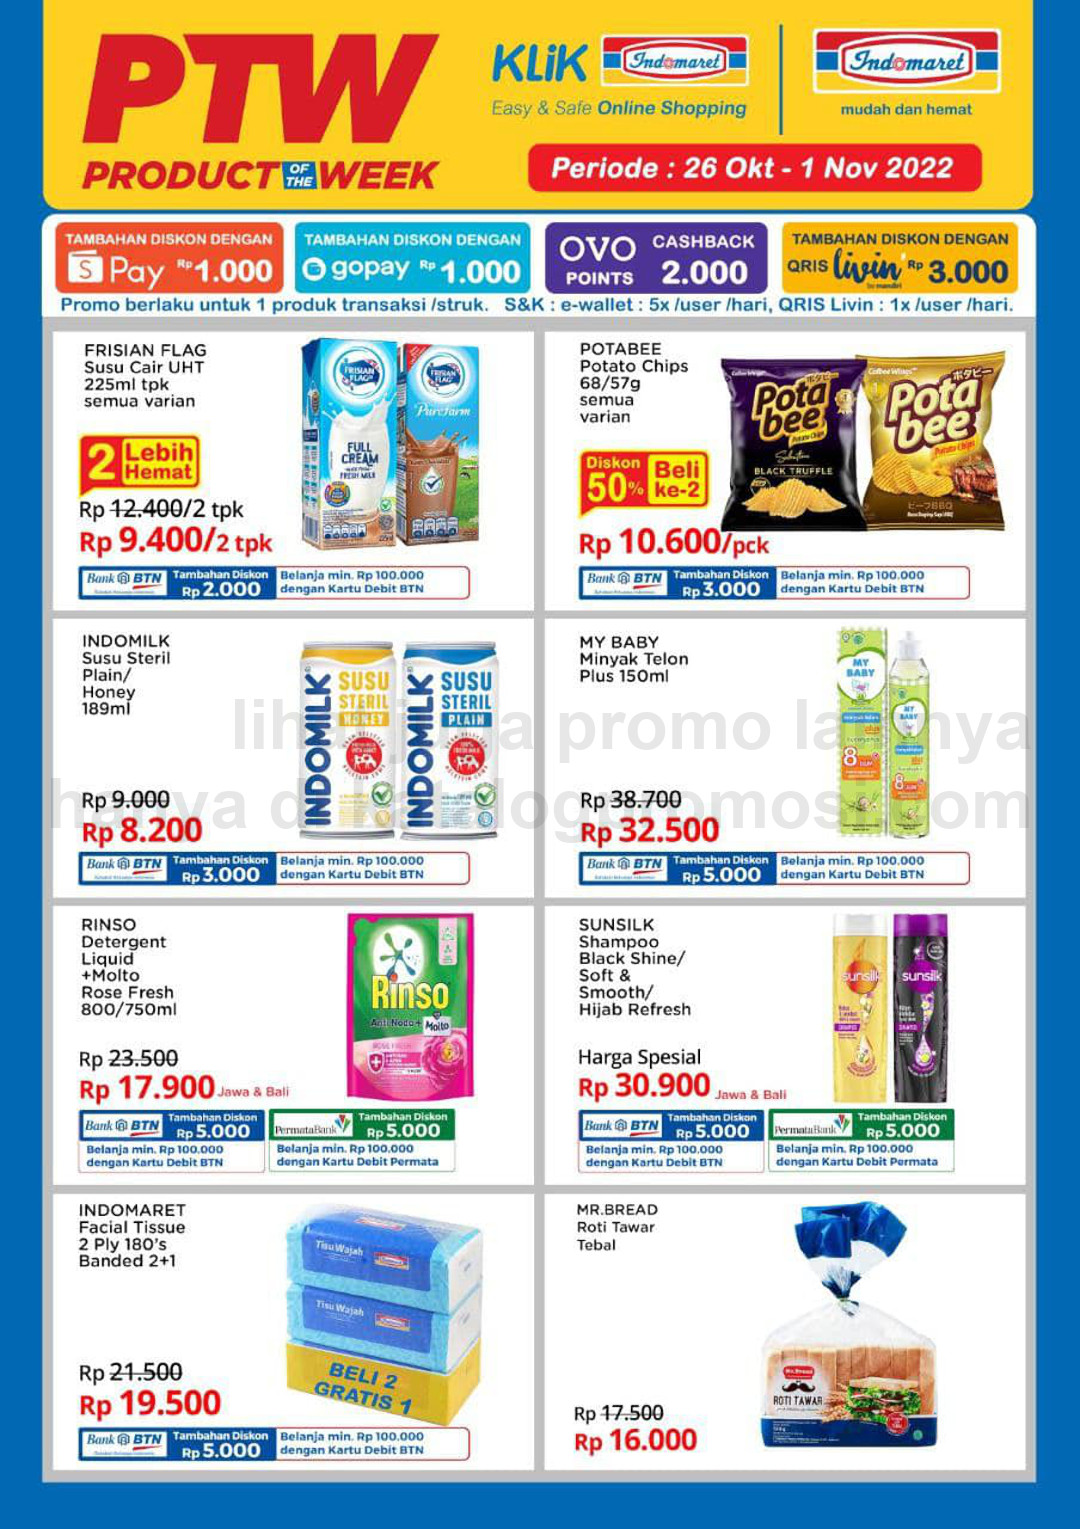 Promo PTW INDOMARET – PRODUCT of The Week periode 26 Oktober – 01 November 2022